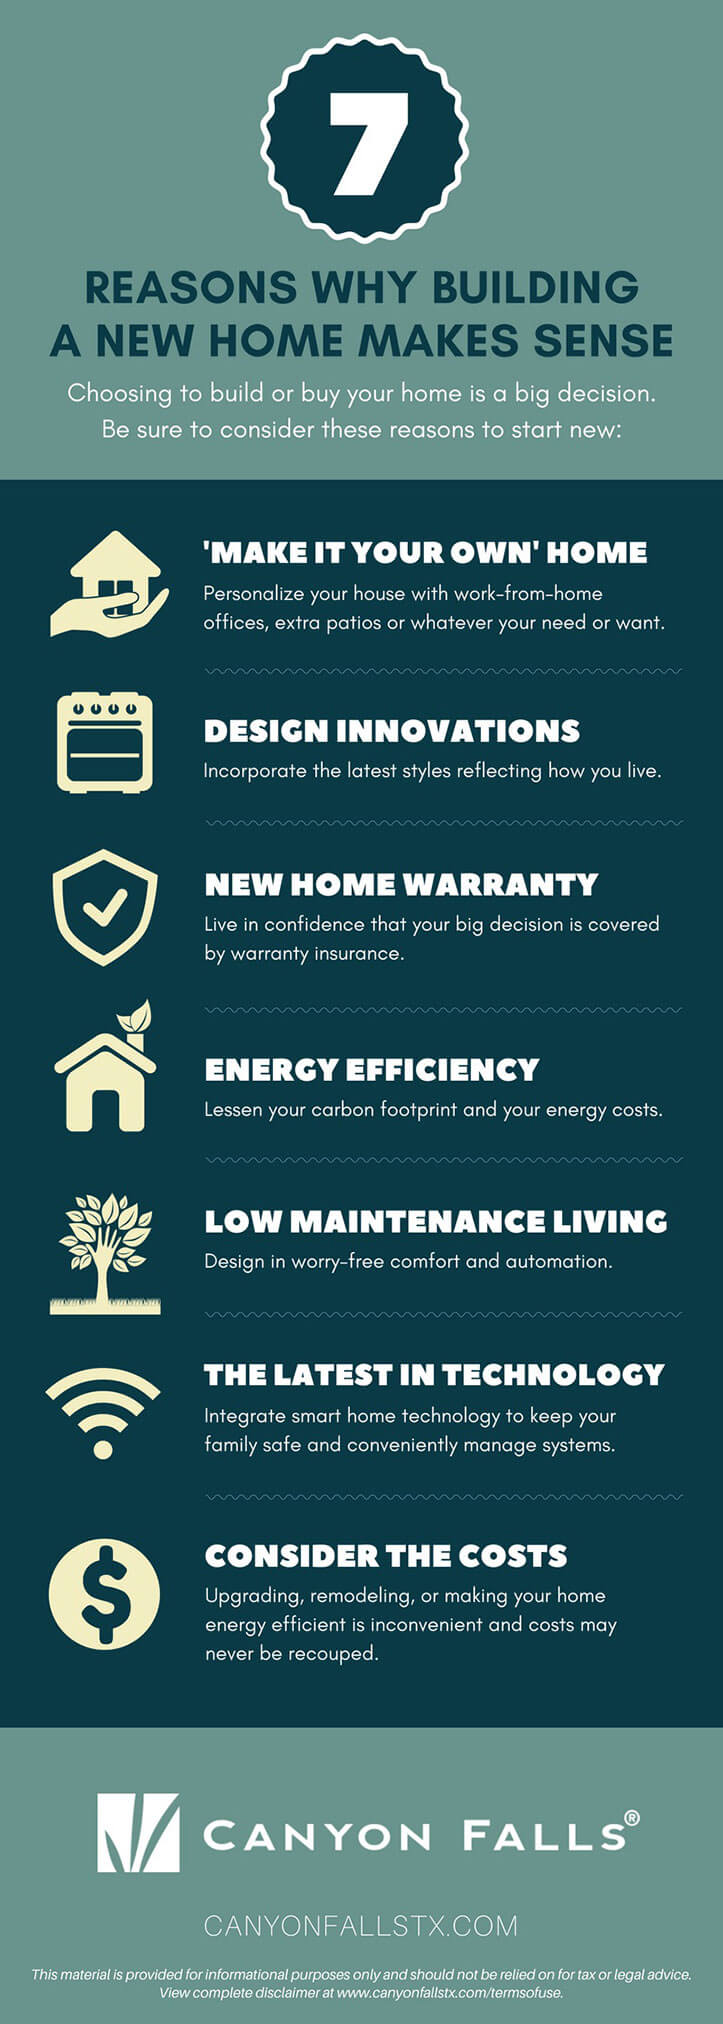 Infographic: 7 resons why building a new home makes sense